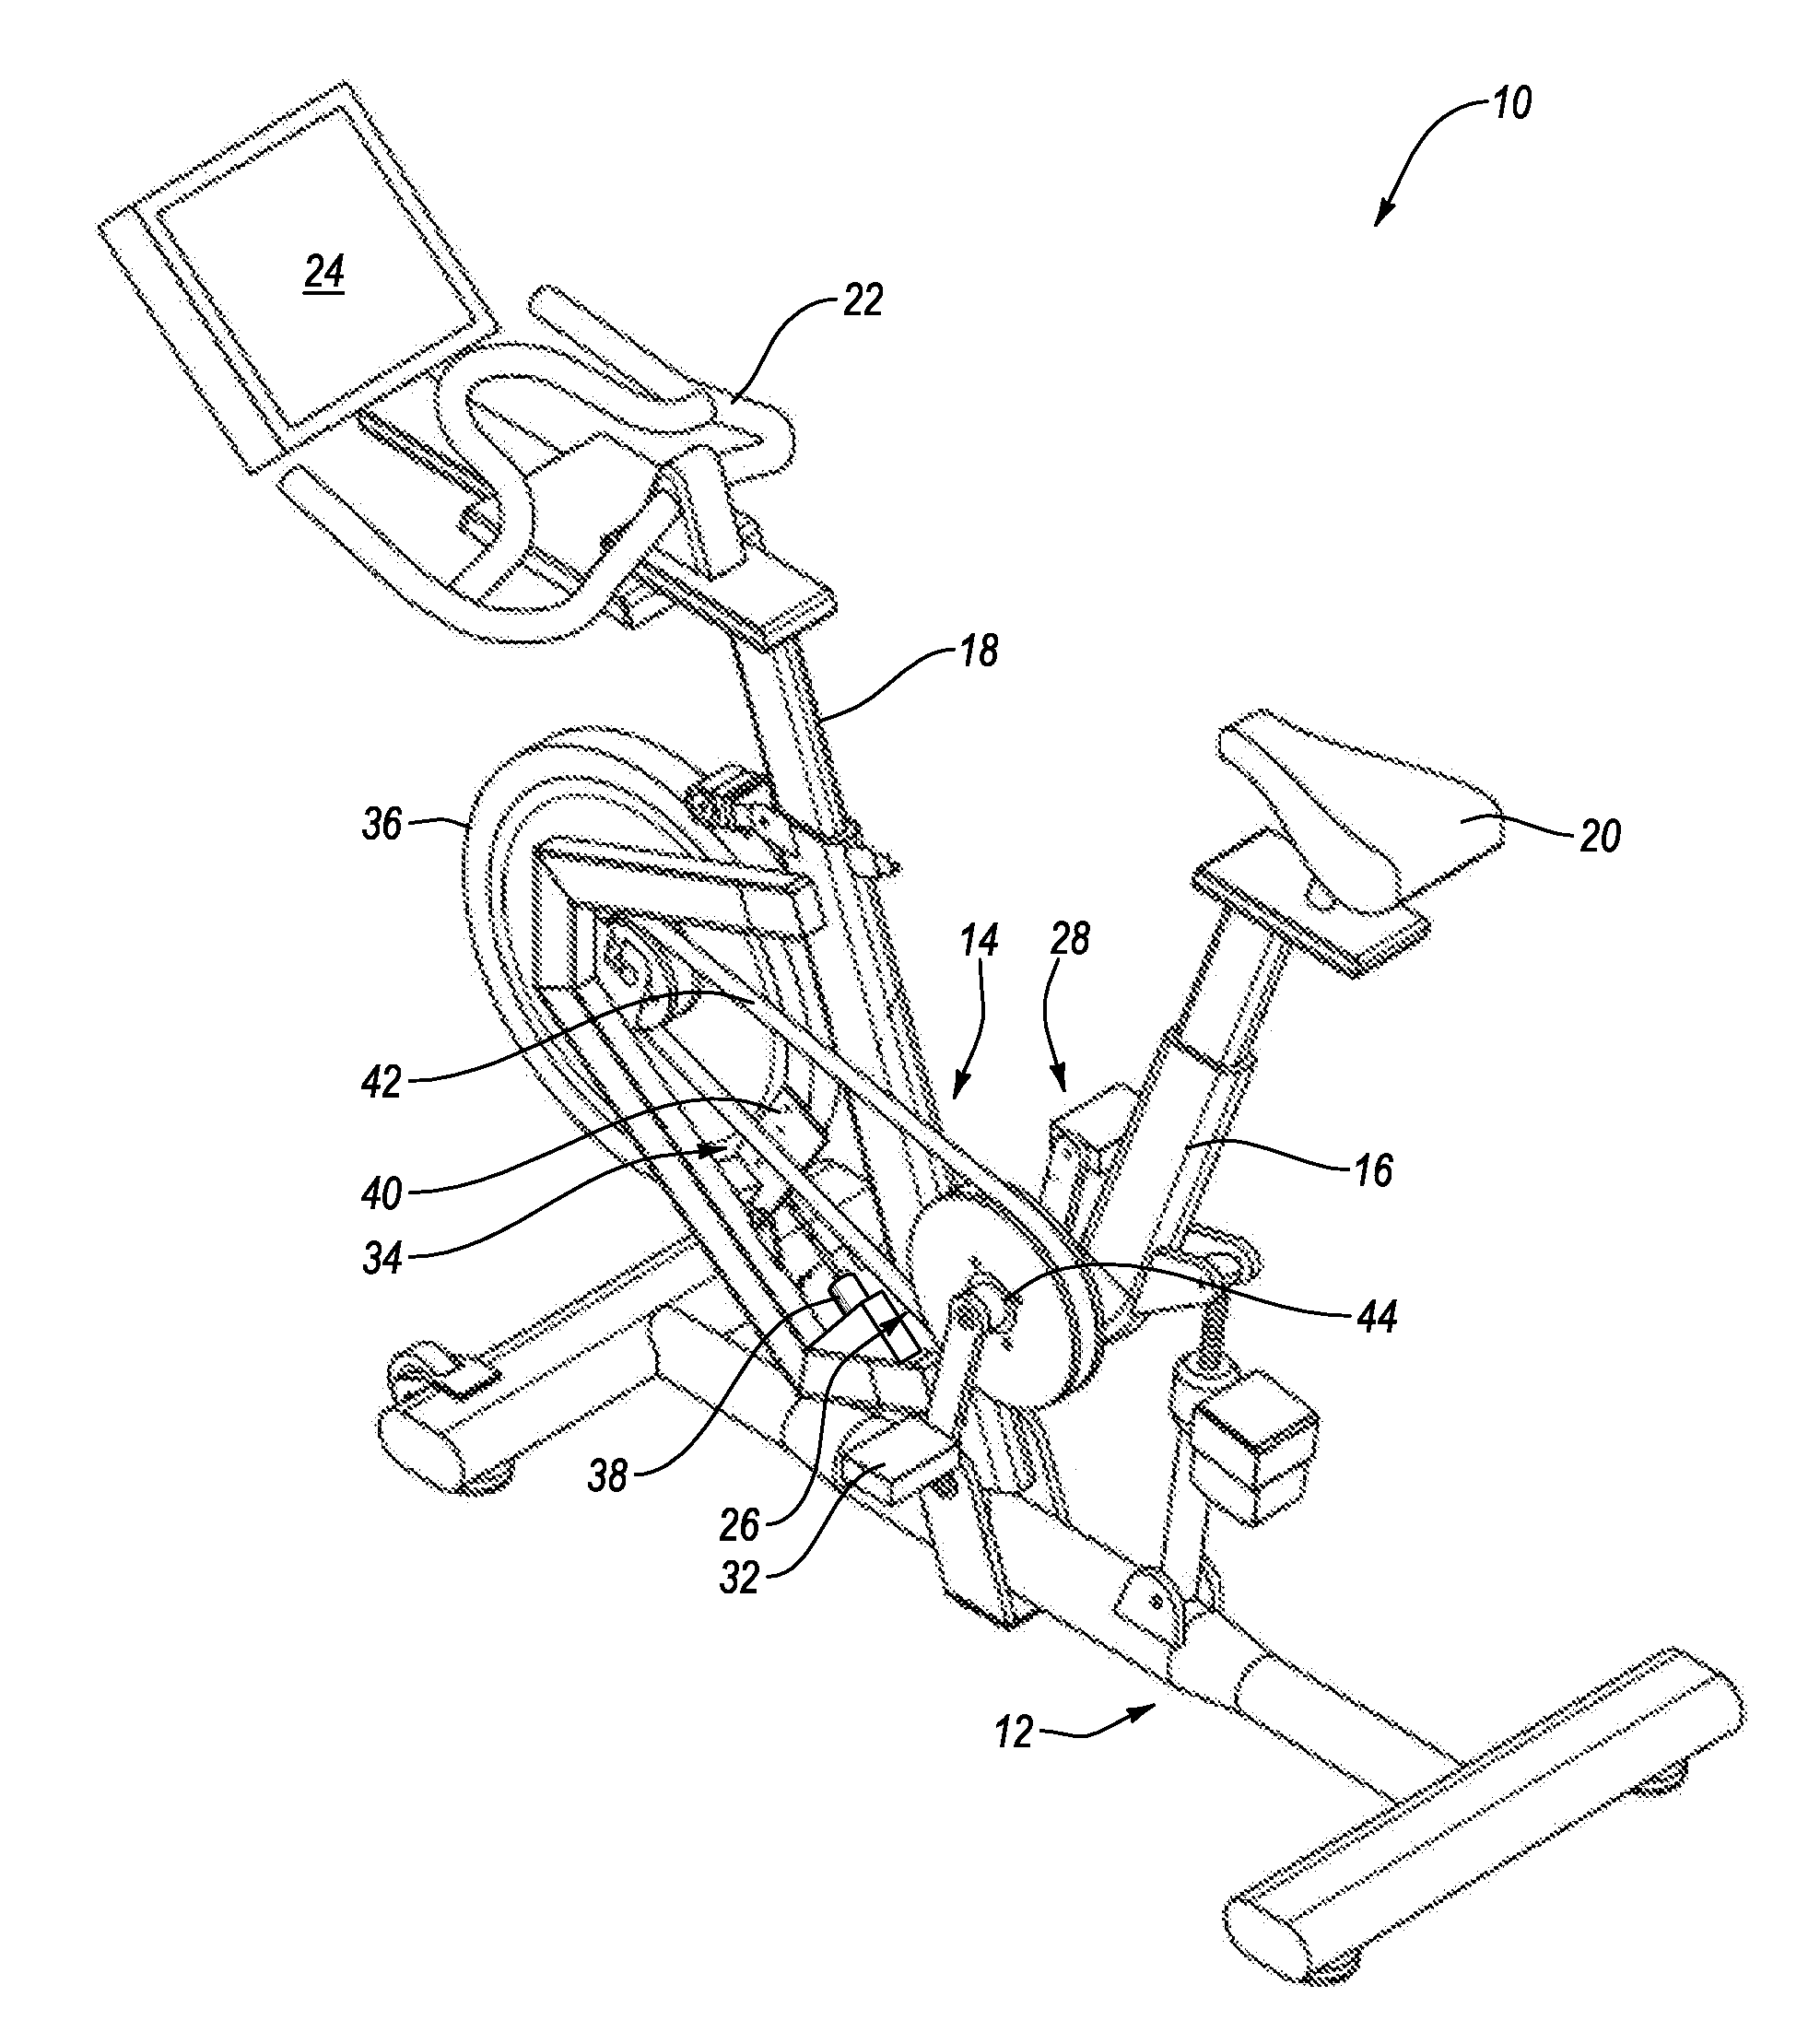 System and Method for Simulating Environmental Conditions on an Exercise Bicycle